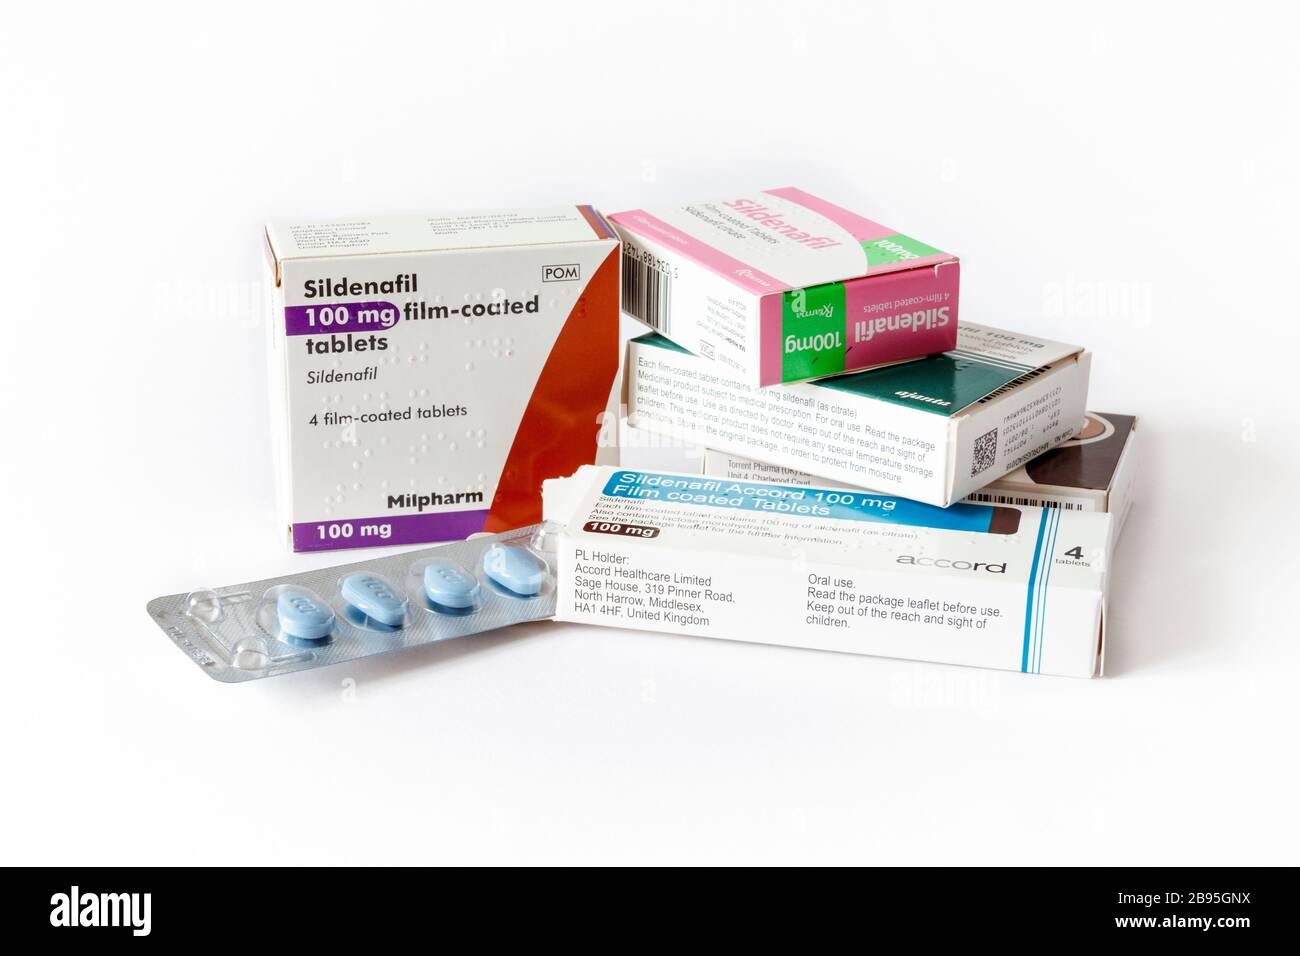 Boxes of Sildenafil tablets, sold under the brand name Viagra among others, a medication for treating erectile dysfunction Stock Photo